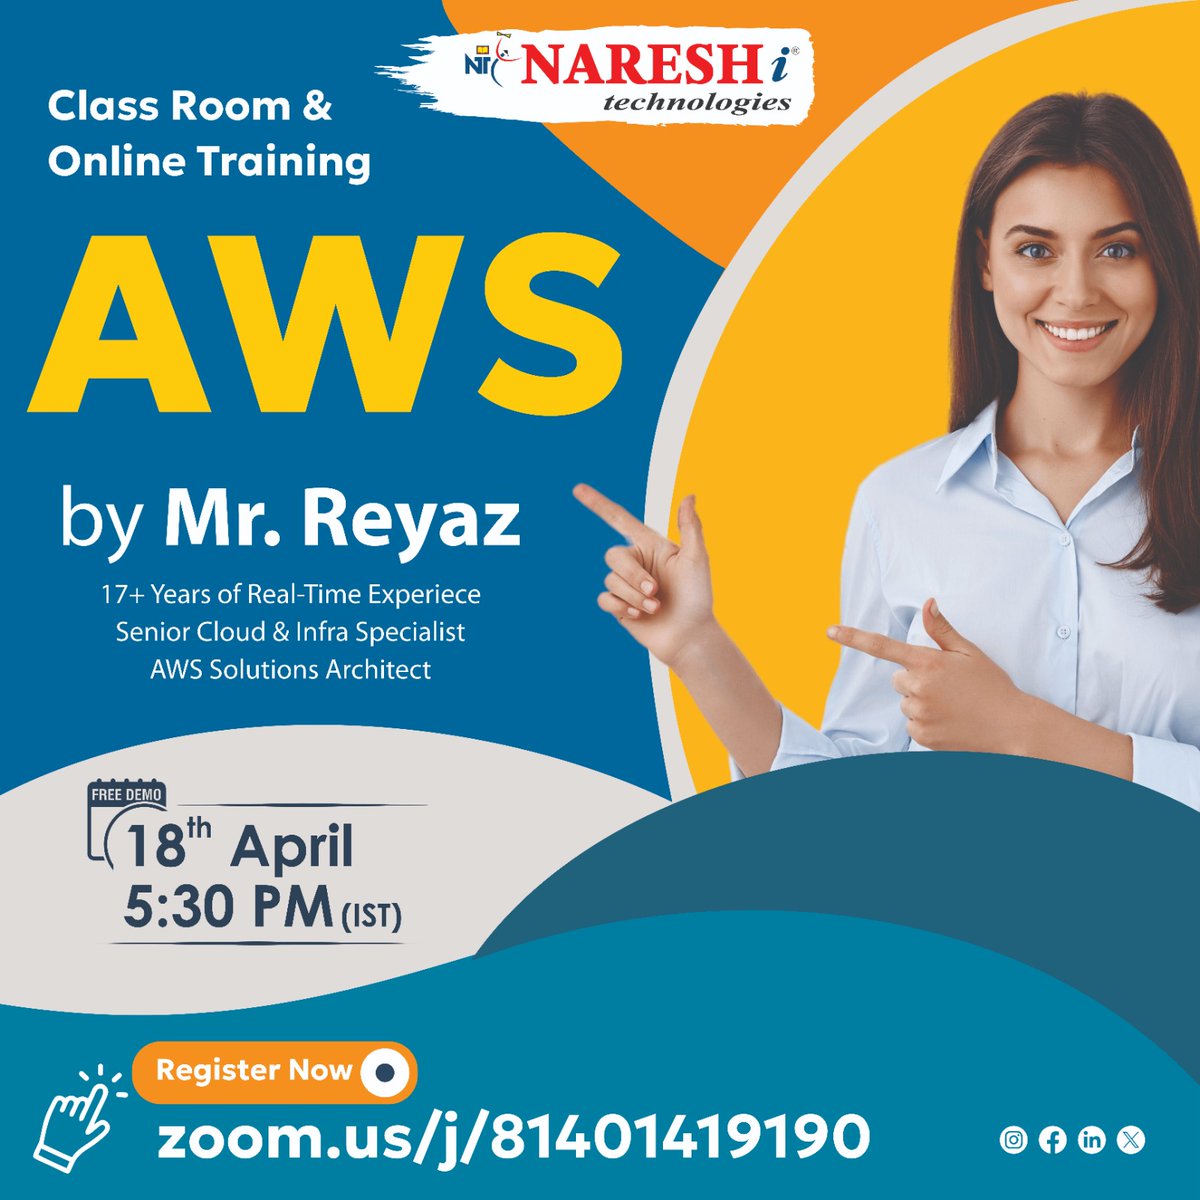 ✍️Enroll Now: bit.ly/3W0Oic1
👉Attend Free Demo On AWS by Mr. Reyaz .
📅Demo On: 18th April @ 5:30 PM (IST)
For More Details:
🌐Visit: nareshit.com/new-batches
#aws #cloud #webservices #webdevelopment #java #python #fullstack #devops #learning #onlinetraining #education #